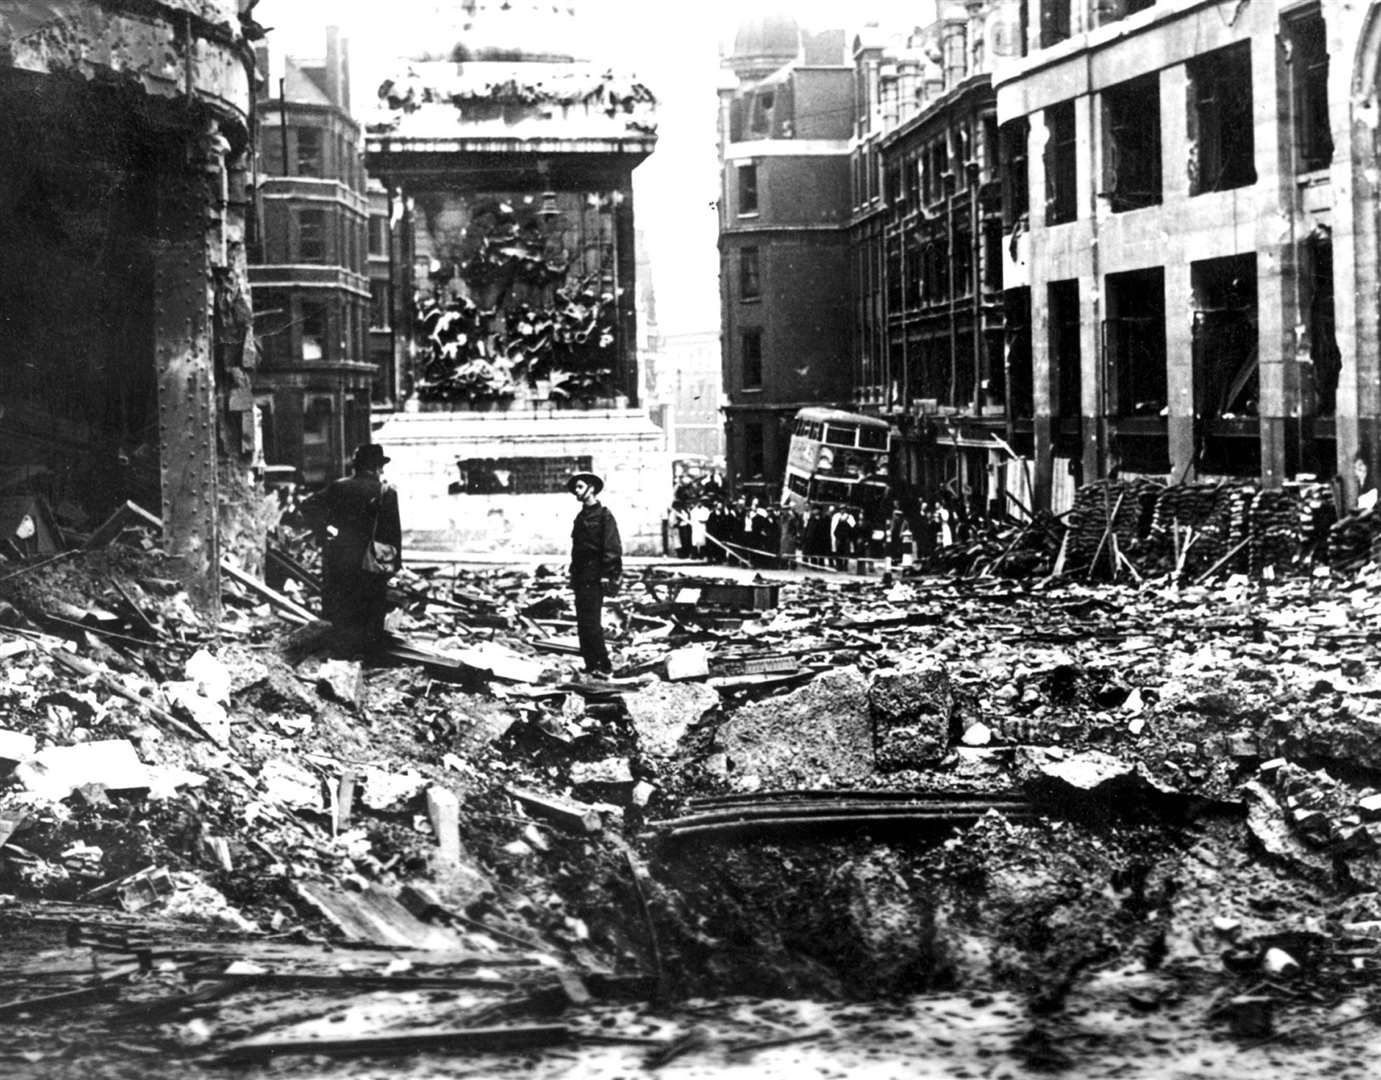 Bomb damage during the Blitz at the Monument to the Great Fire of London in the City of London (PA)